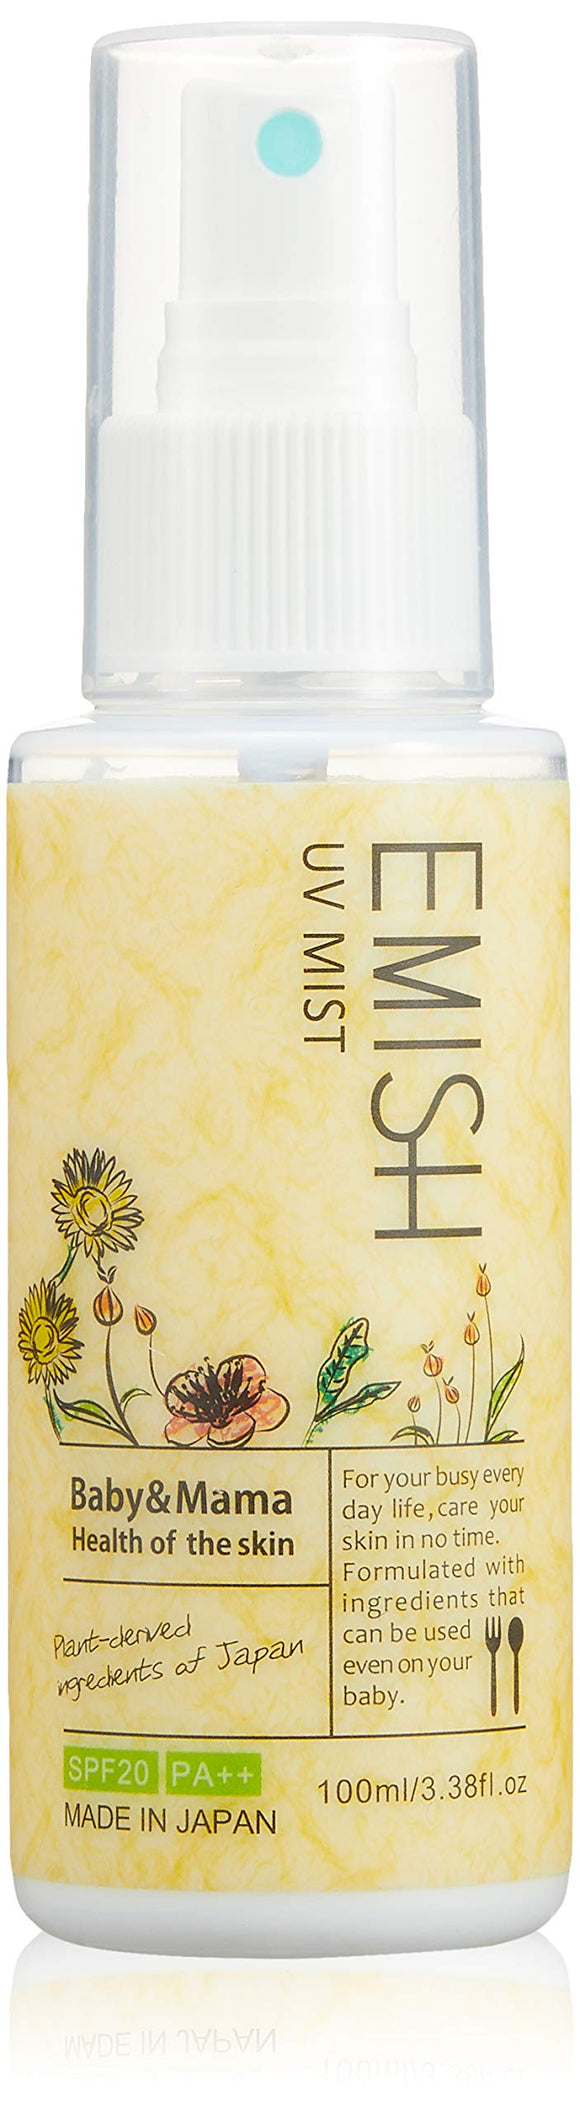 EMISH UV mist SPF20 PA++ for face and body 100ml